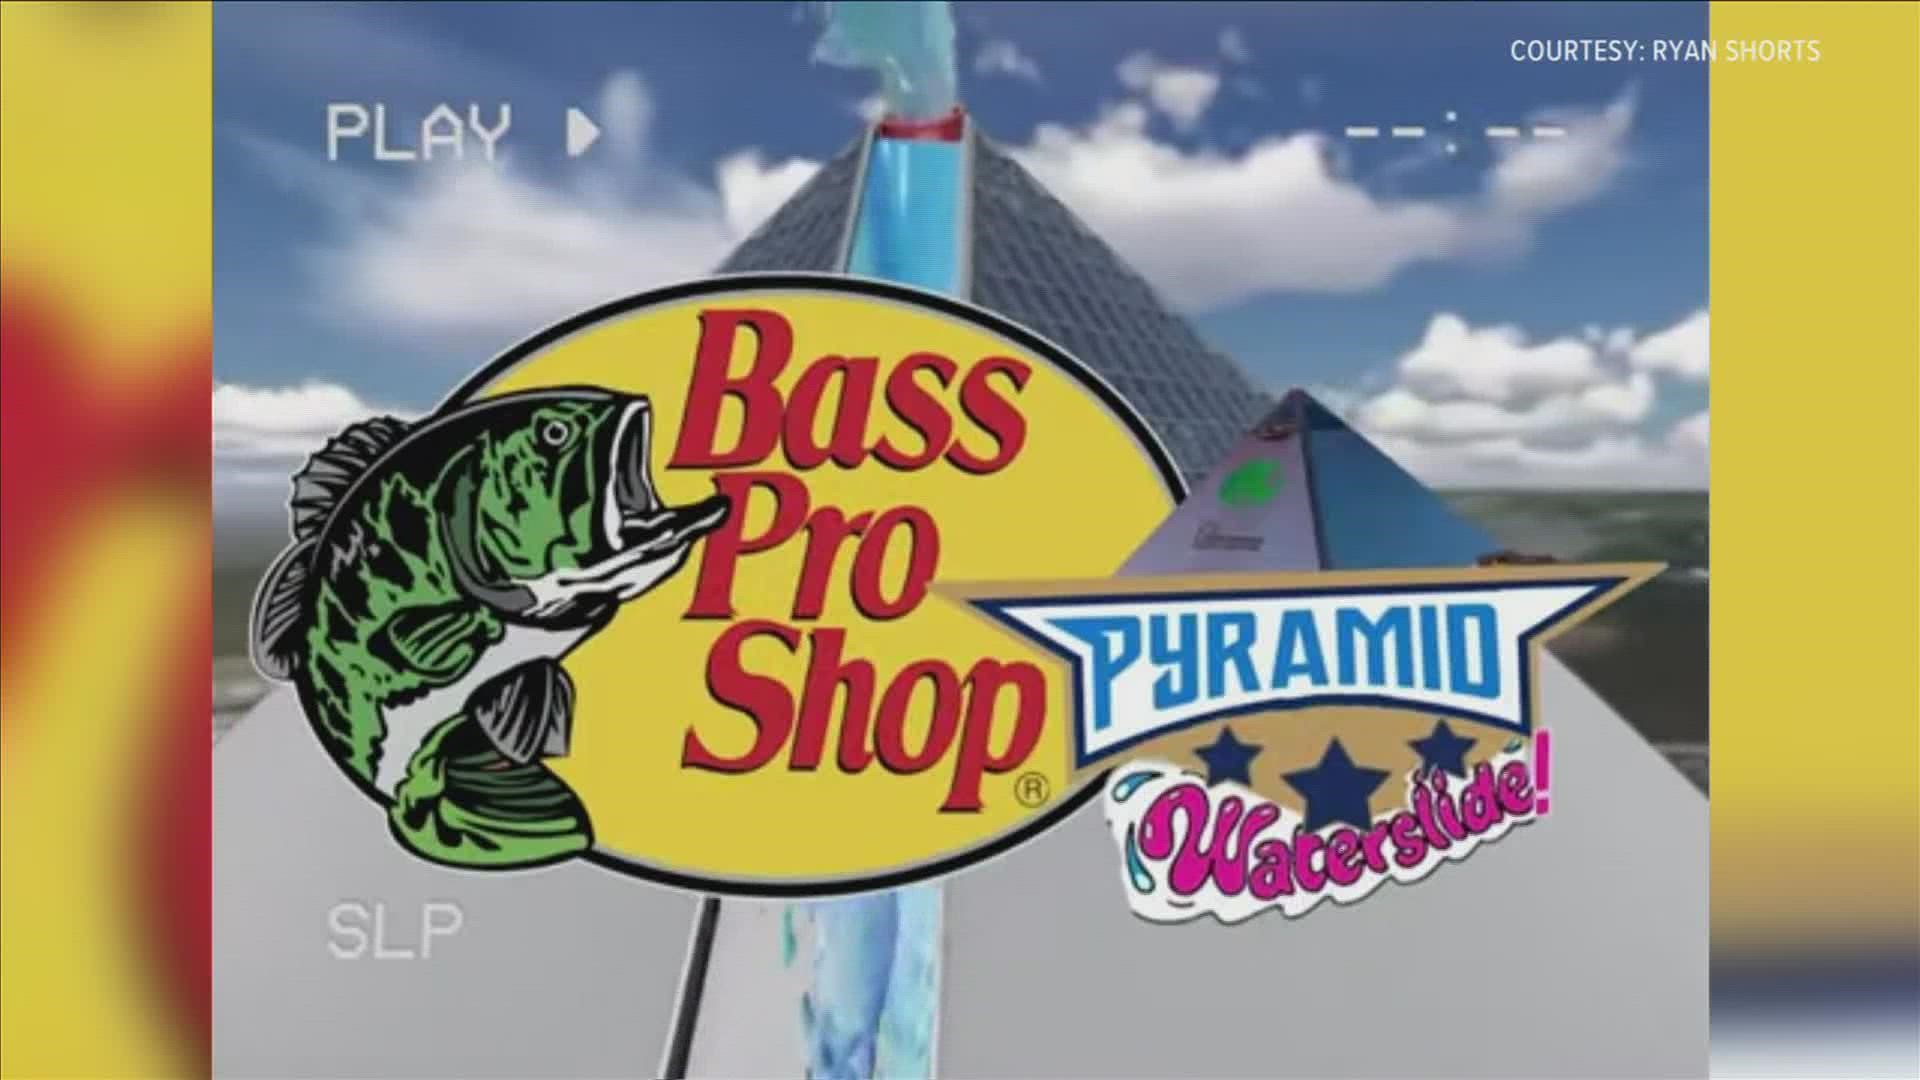 No, Bass Pro Shops has no plans for a waterslide at the Pyramid